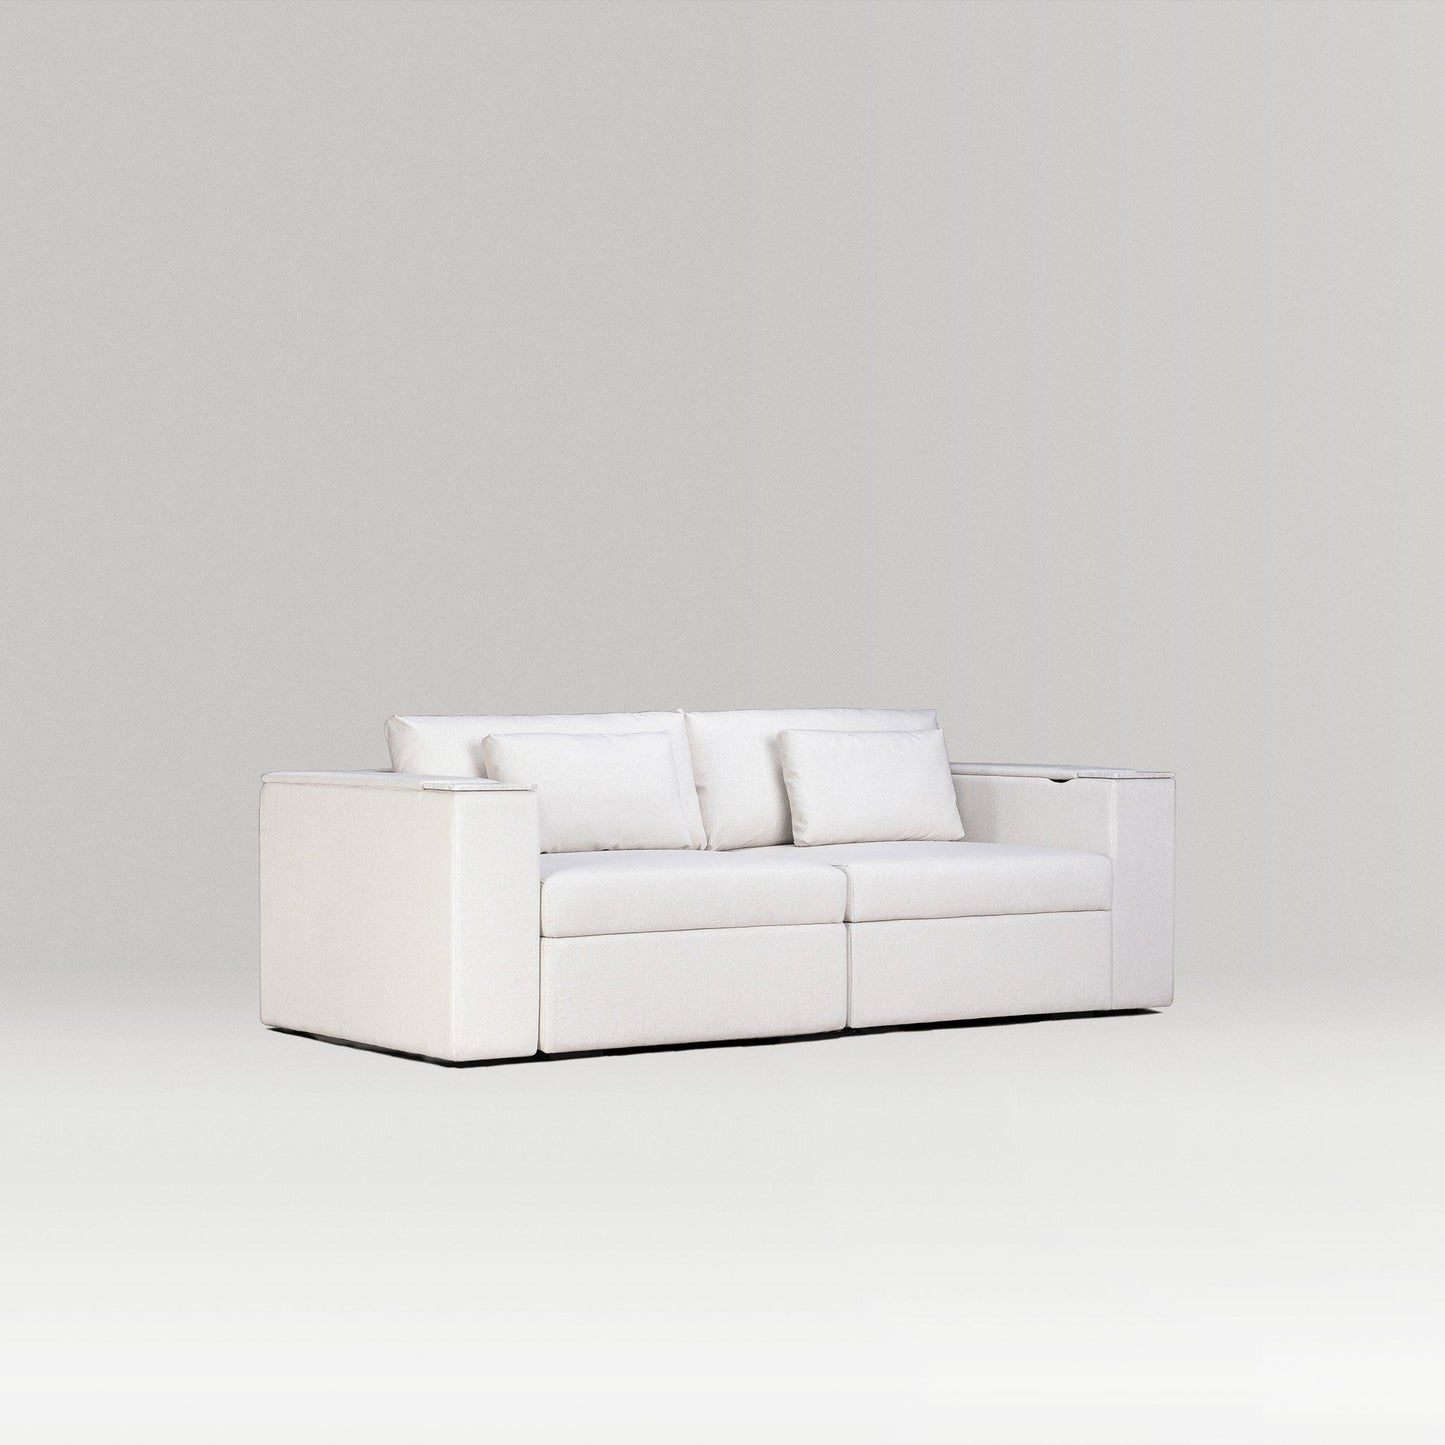 Rezy Design Sofa Store's Two-Seater Sectional Sofa designed to furnish apartments.